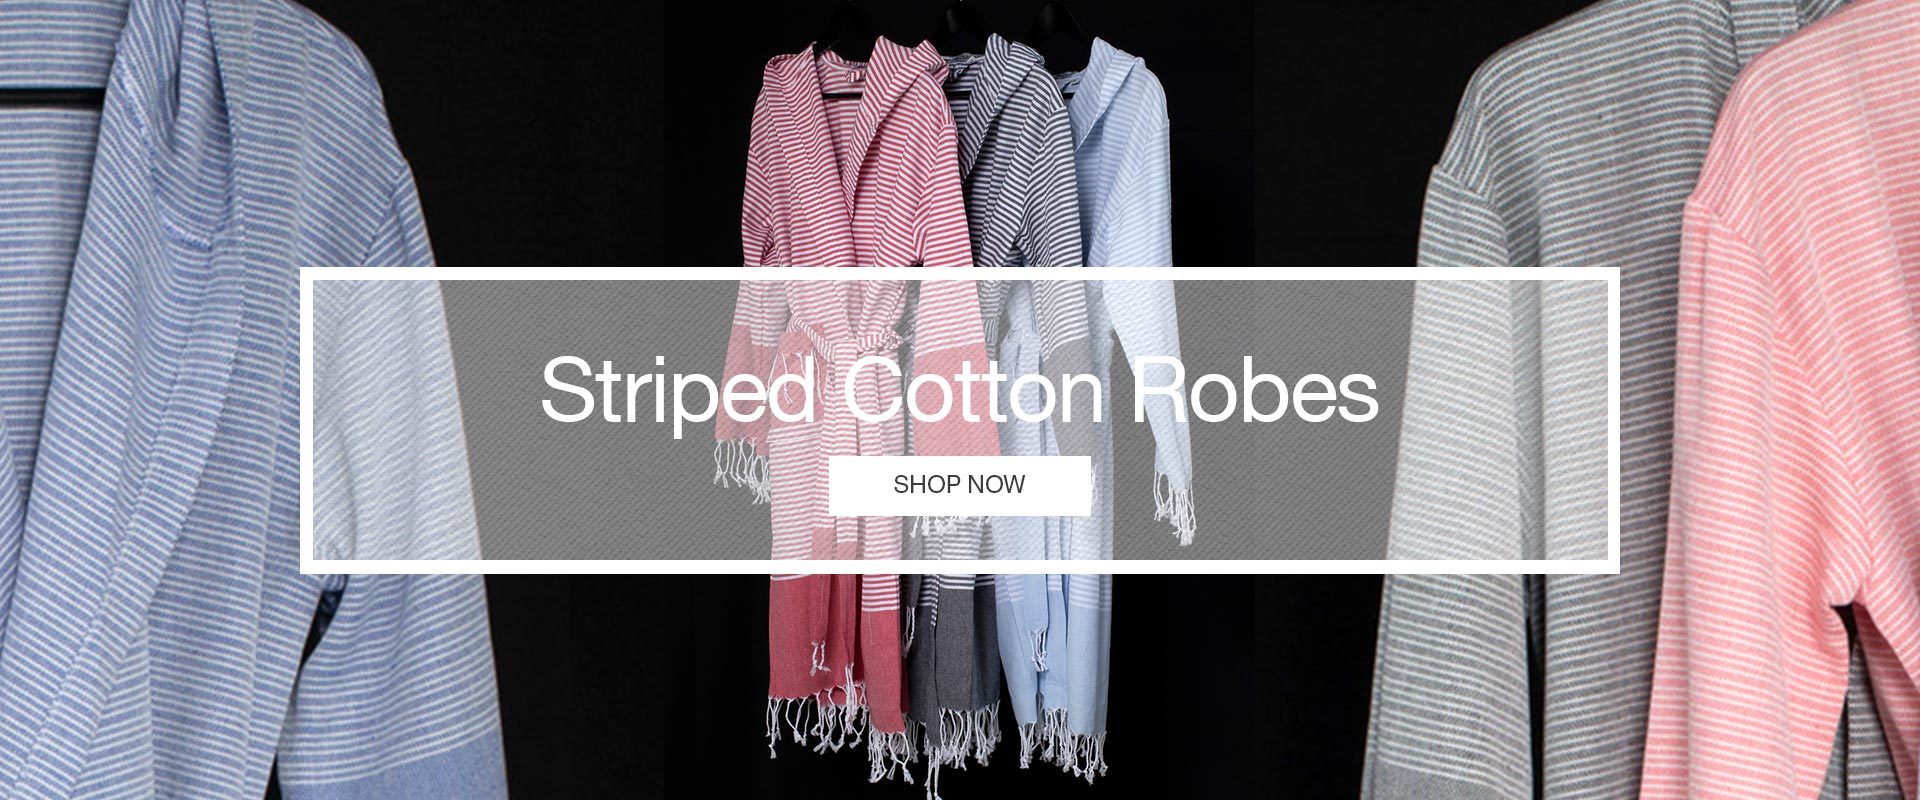 Striped Cotton Robes